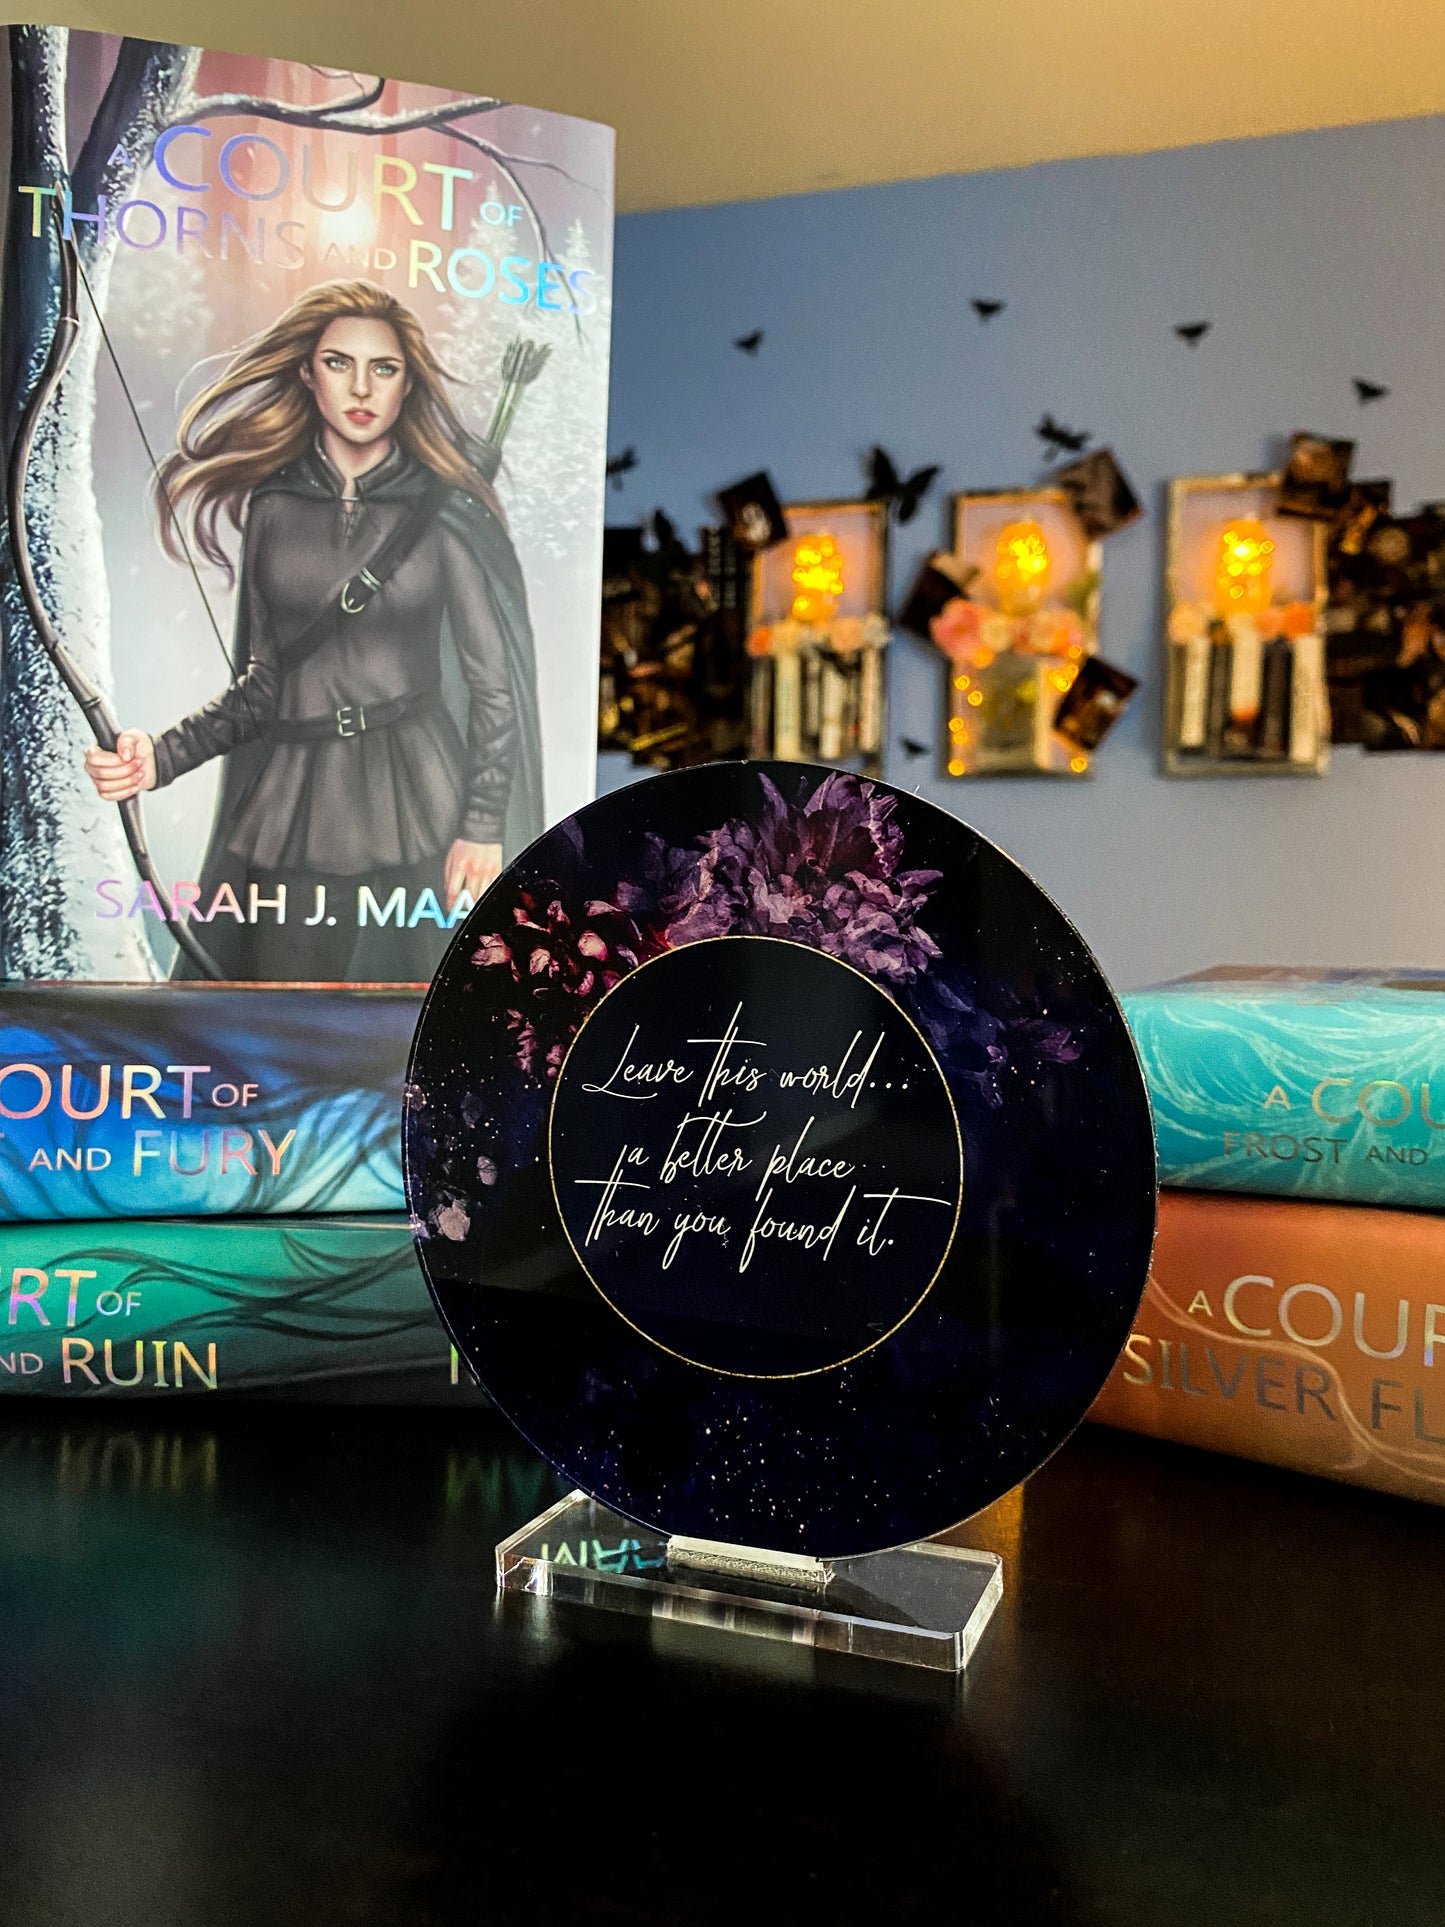 "Leave this world... a better place than you found it." - A Court of Thorns and Roses Series / A Court of Wings and Ruin - Freestanding Bookshelf / Desktop Acrylic Accessory - Officially licensed by Sarah J. Maas - D2